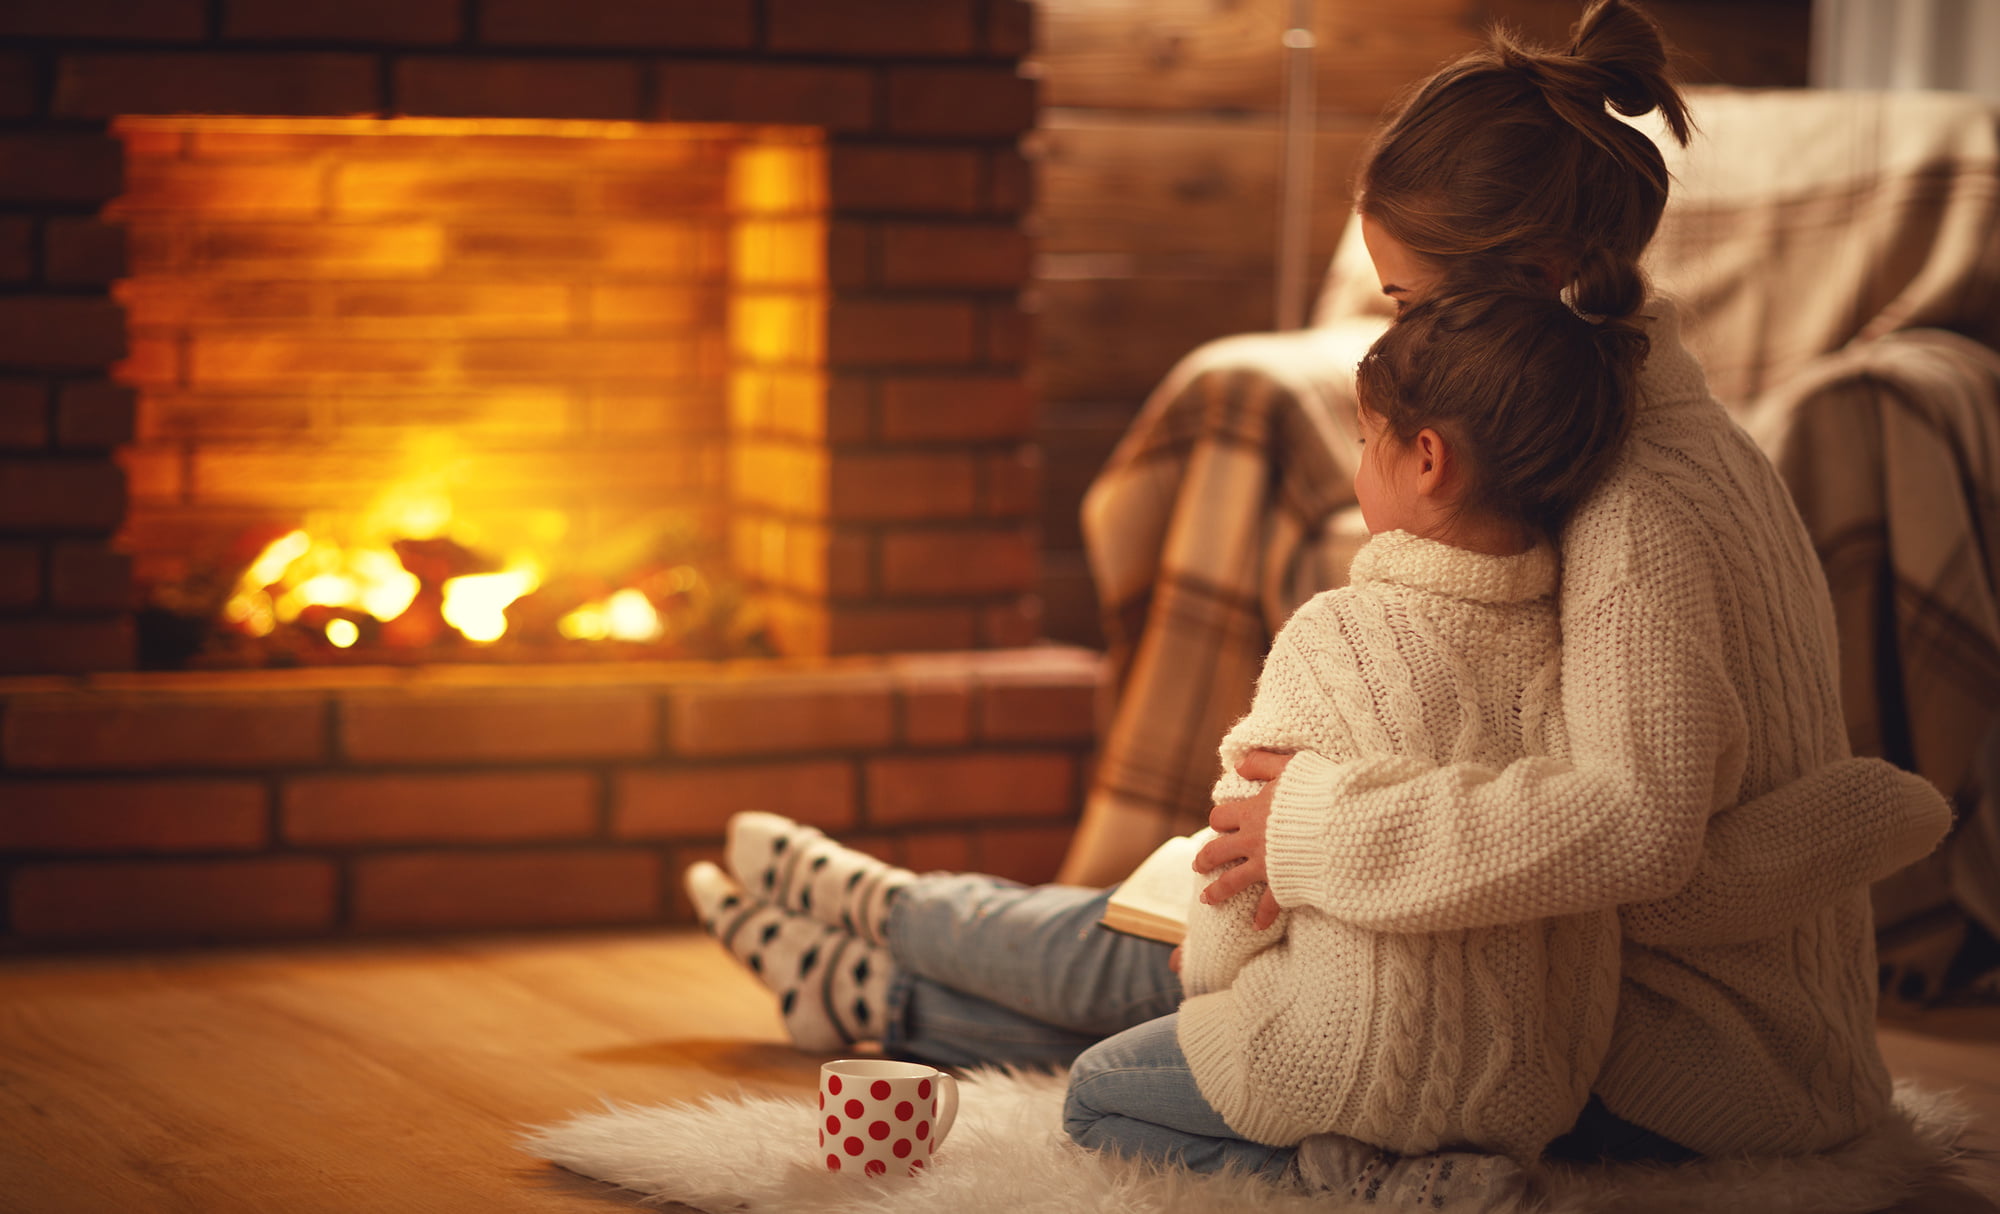 Keeping your house warm is important in the winter. So, try these three tips for saving money on your home heating bill.